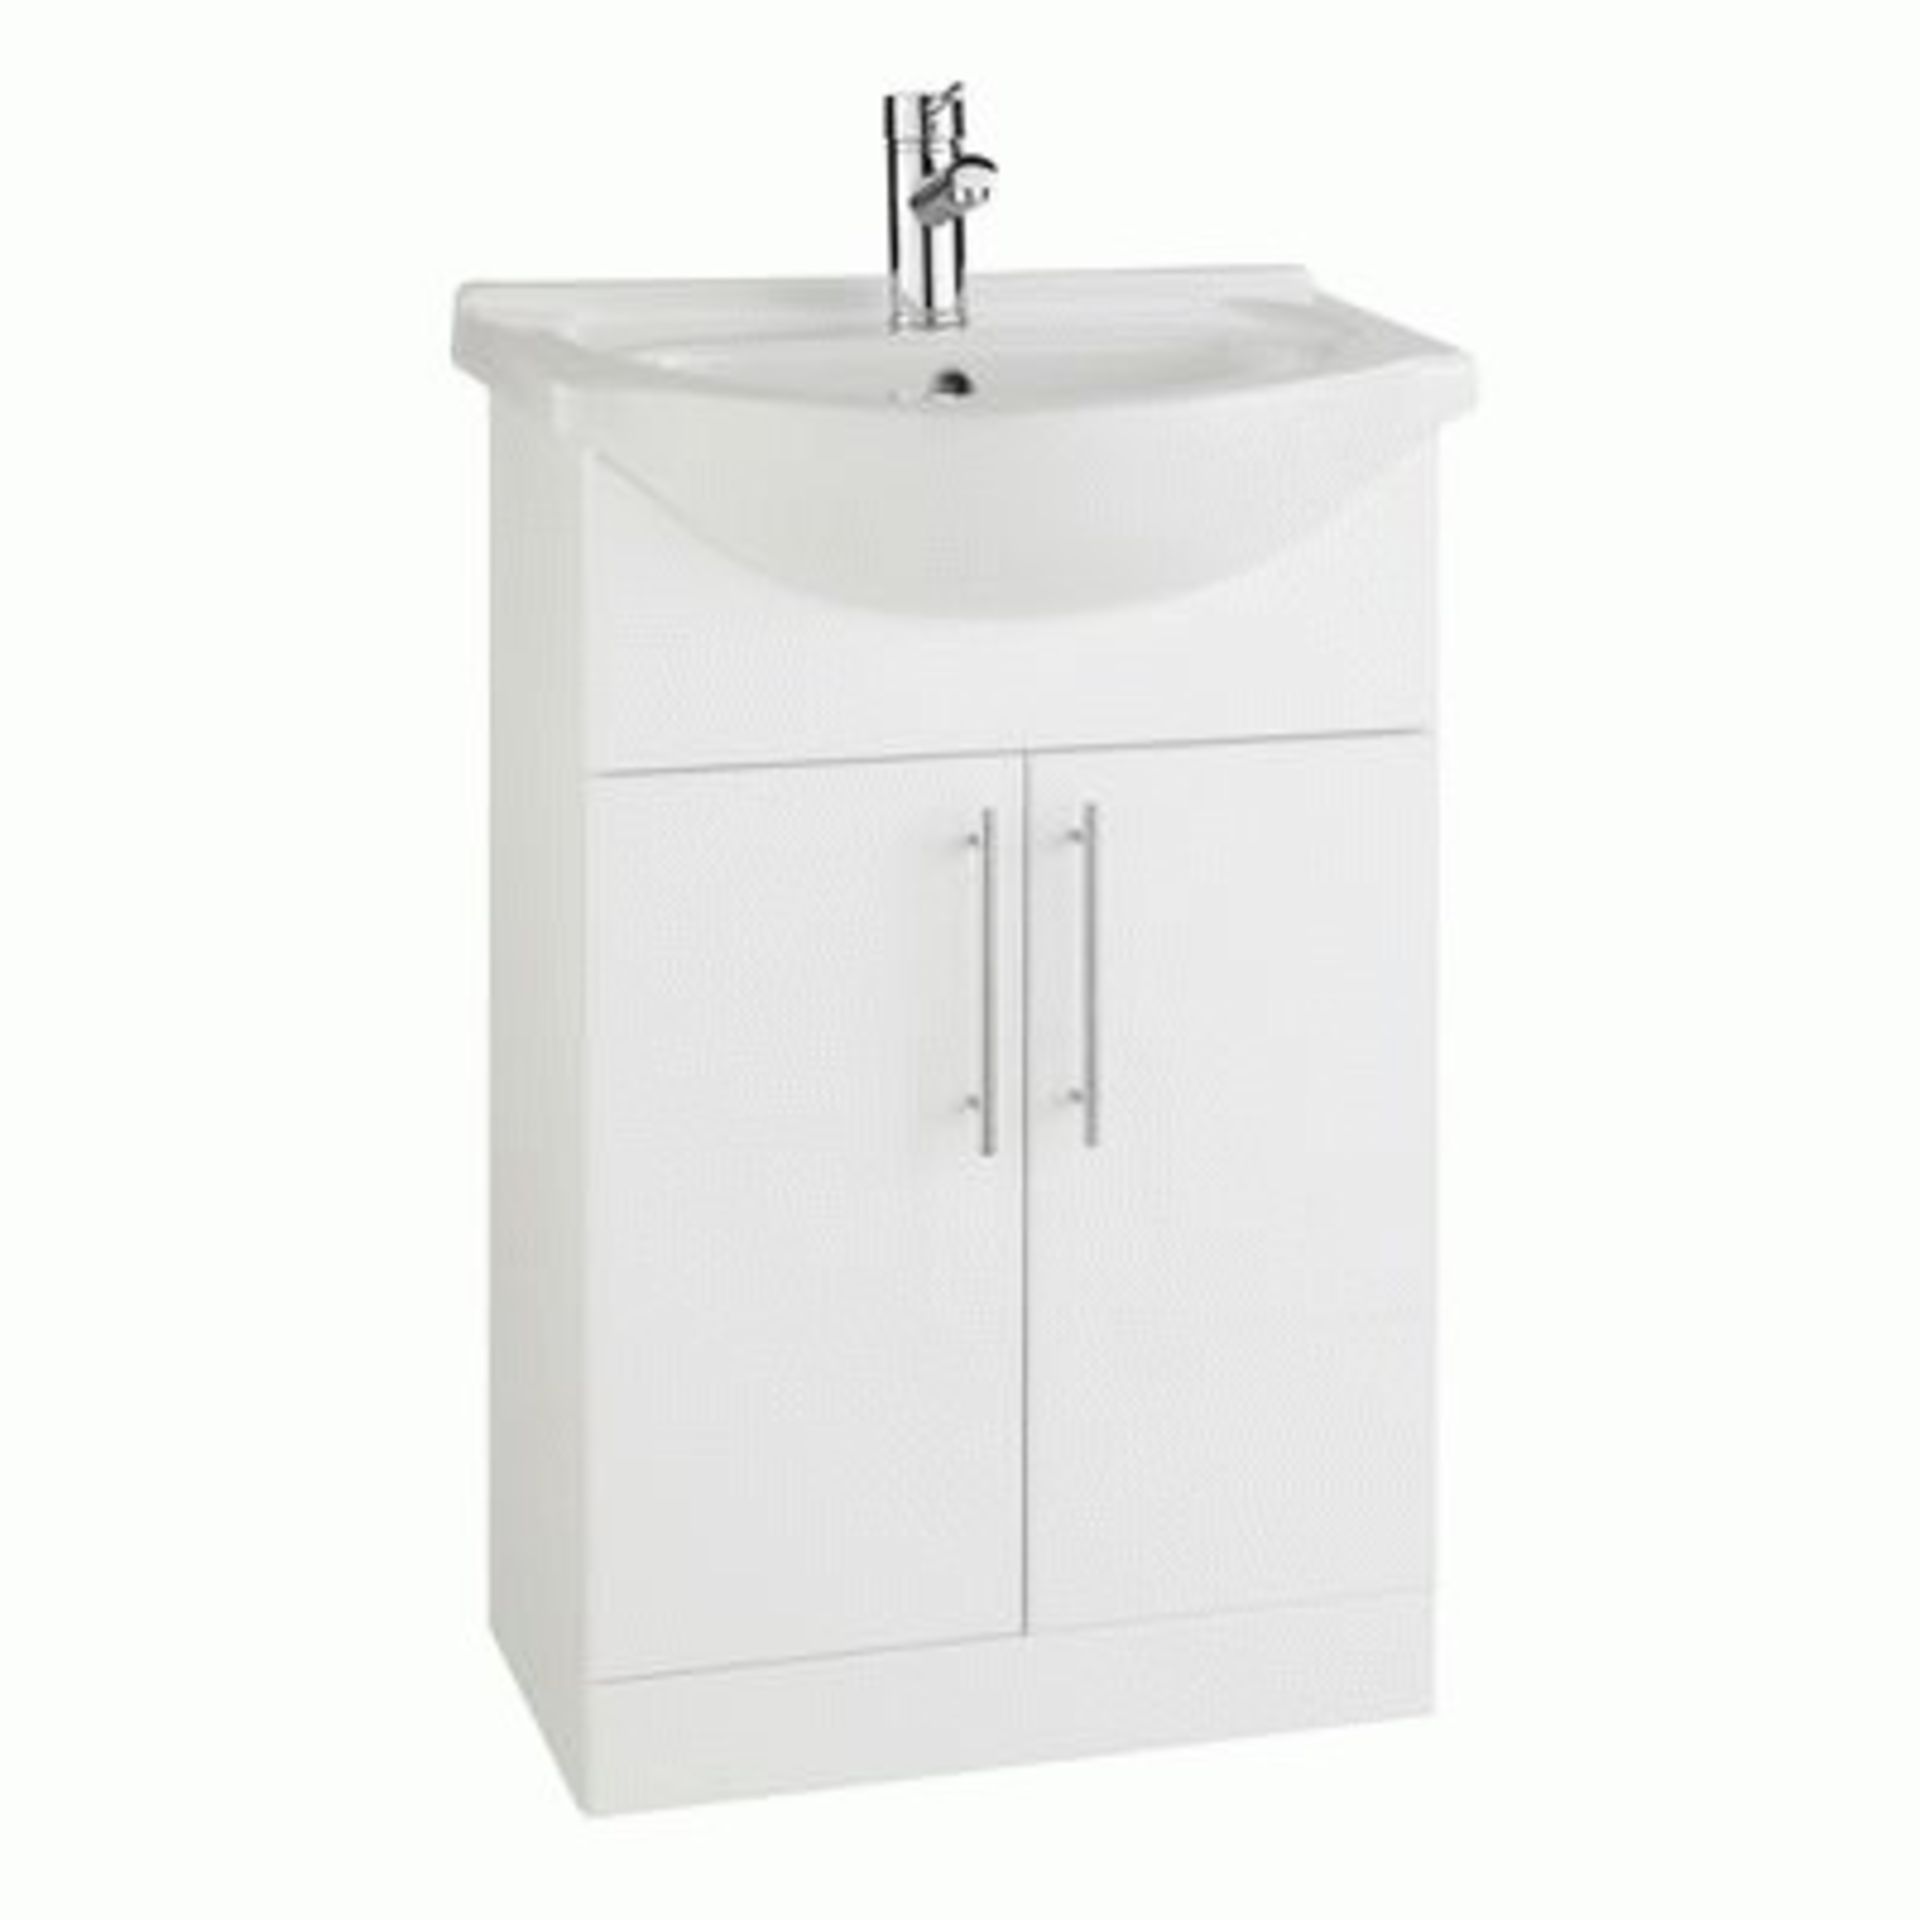 New (Z99) White Gloss Bathroom Sink Basin Cabinet - 550mm Width RRP £349.99. Comes Complete Wi...